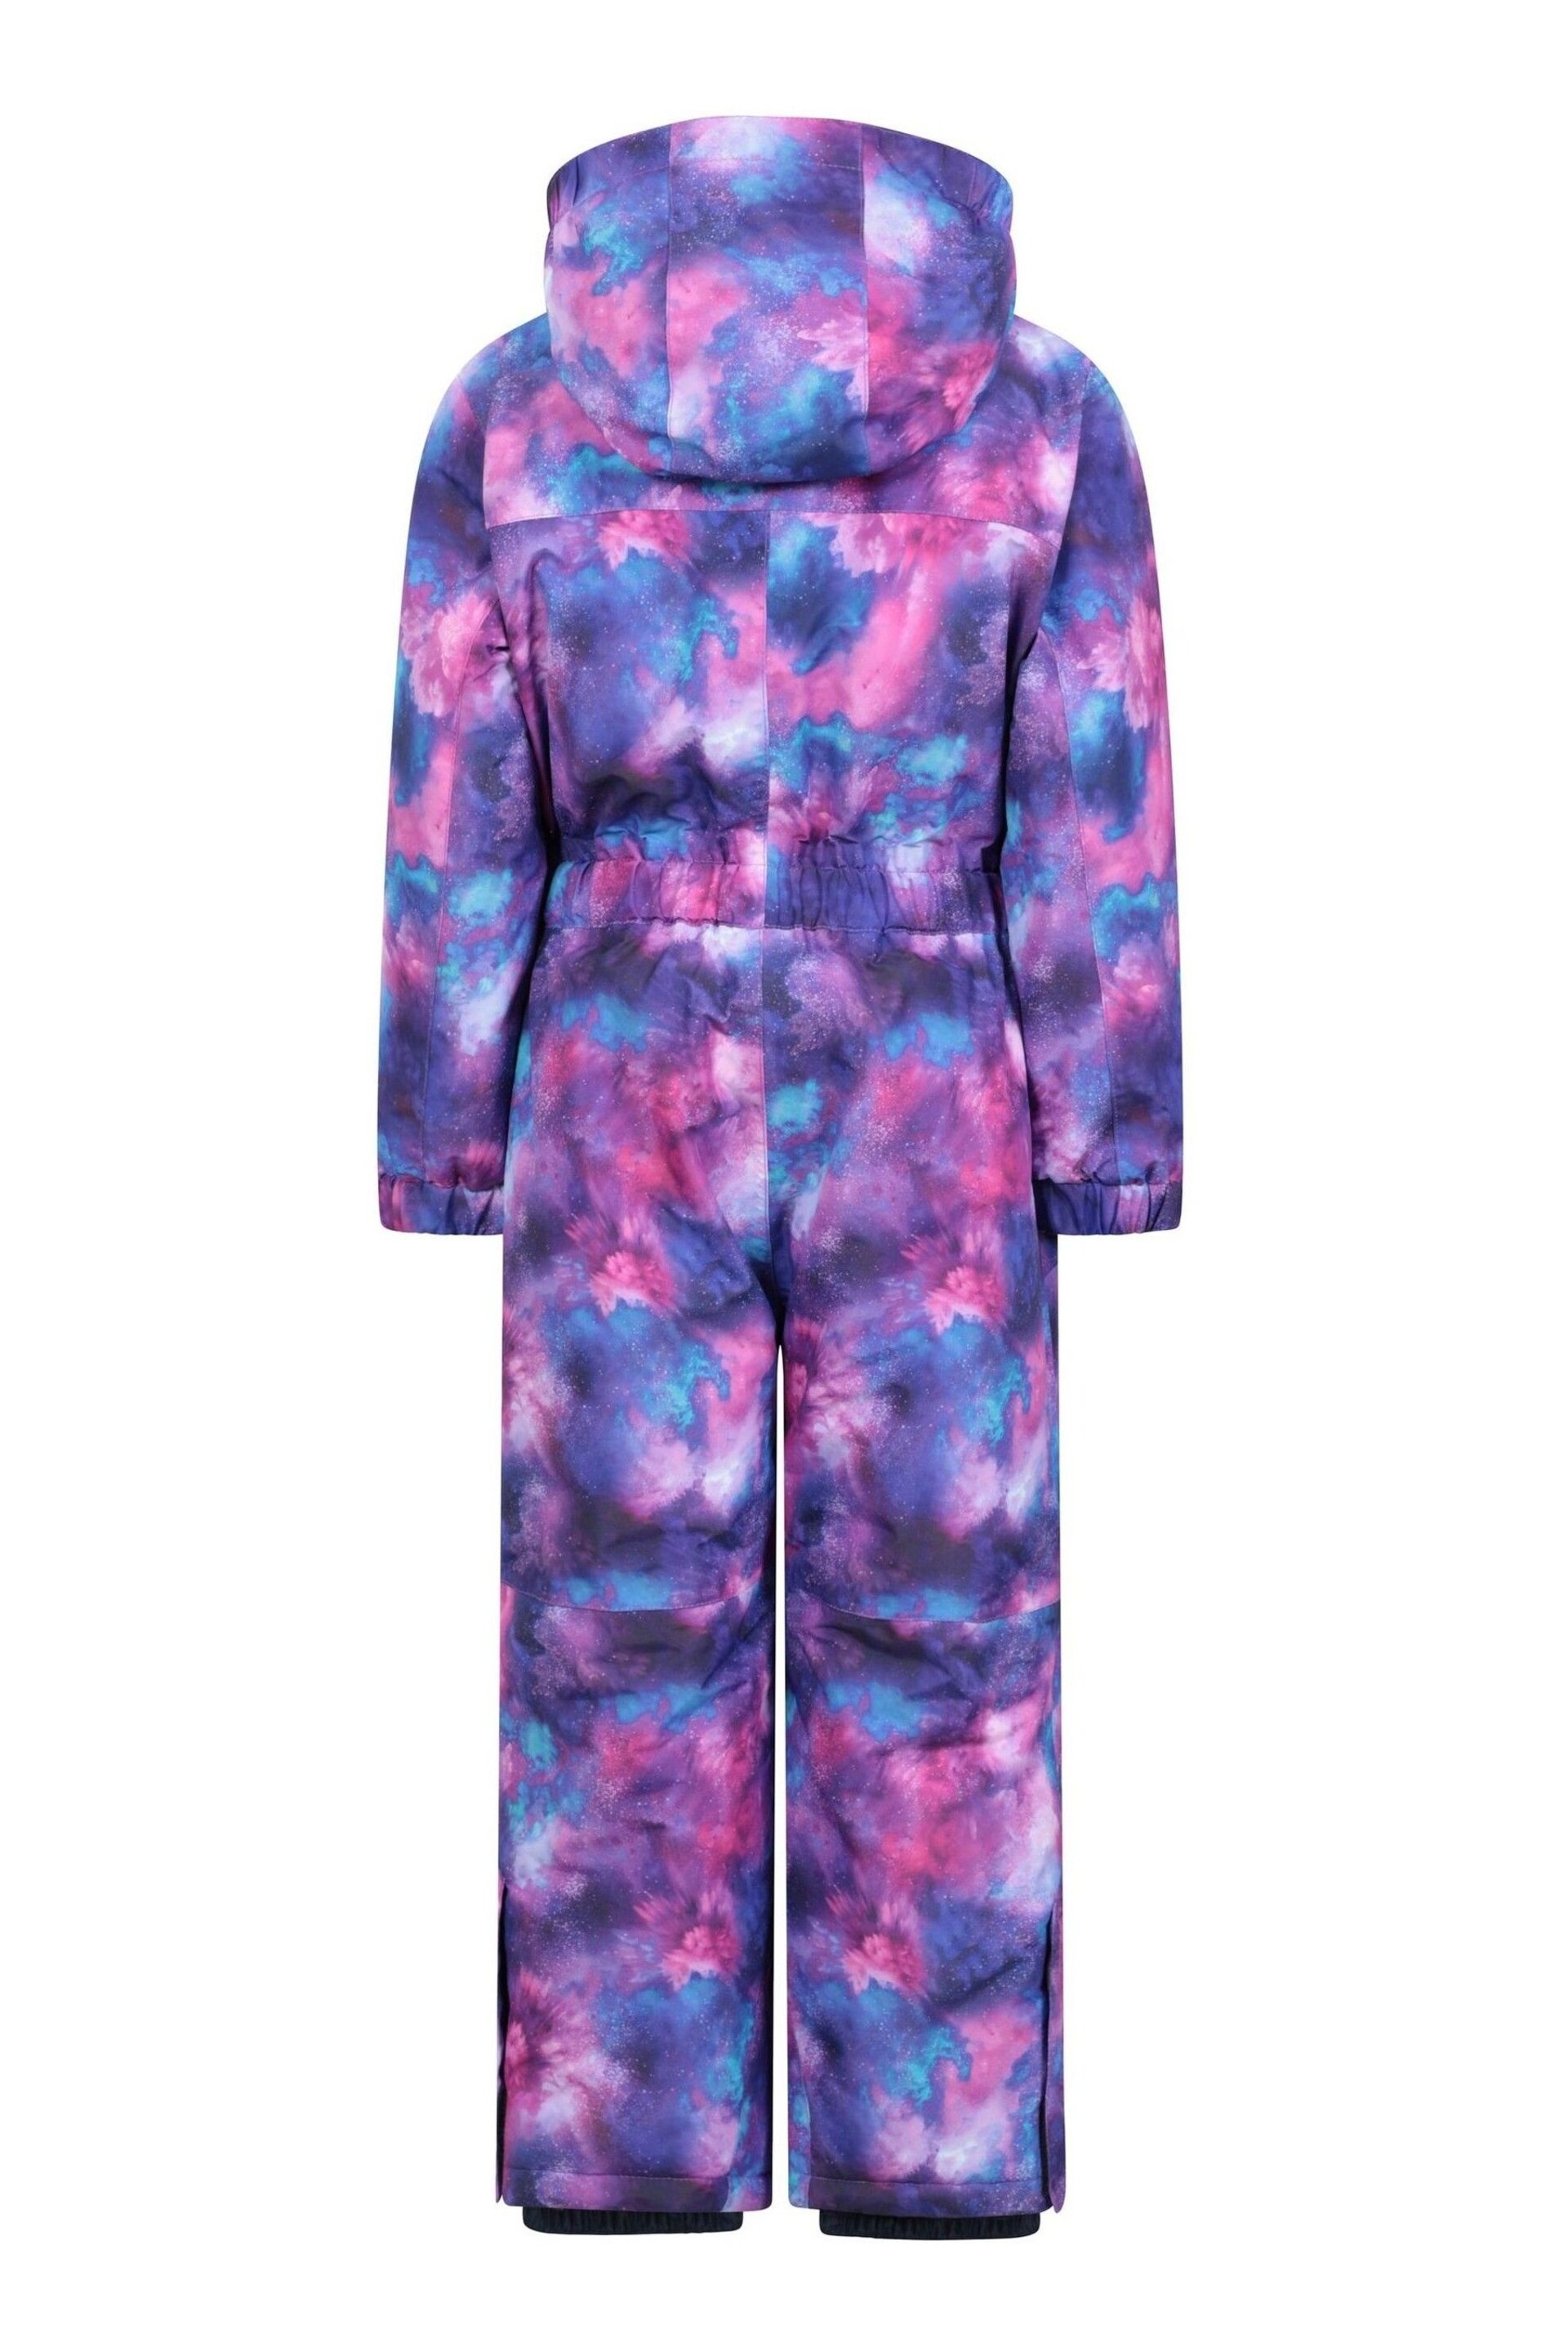 Mountain Warehouse Pink Kids Cloud Printed All in One Snowsuit - Image 4 of 5